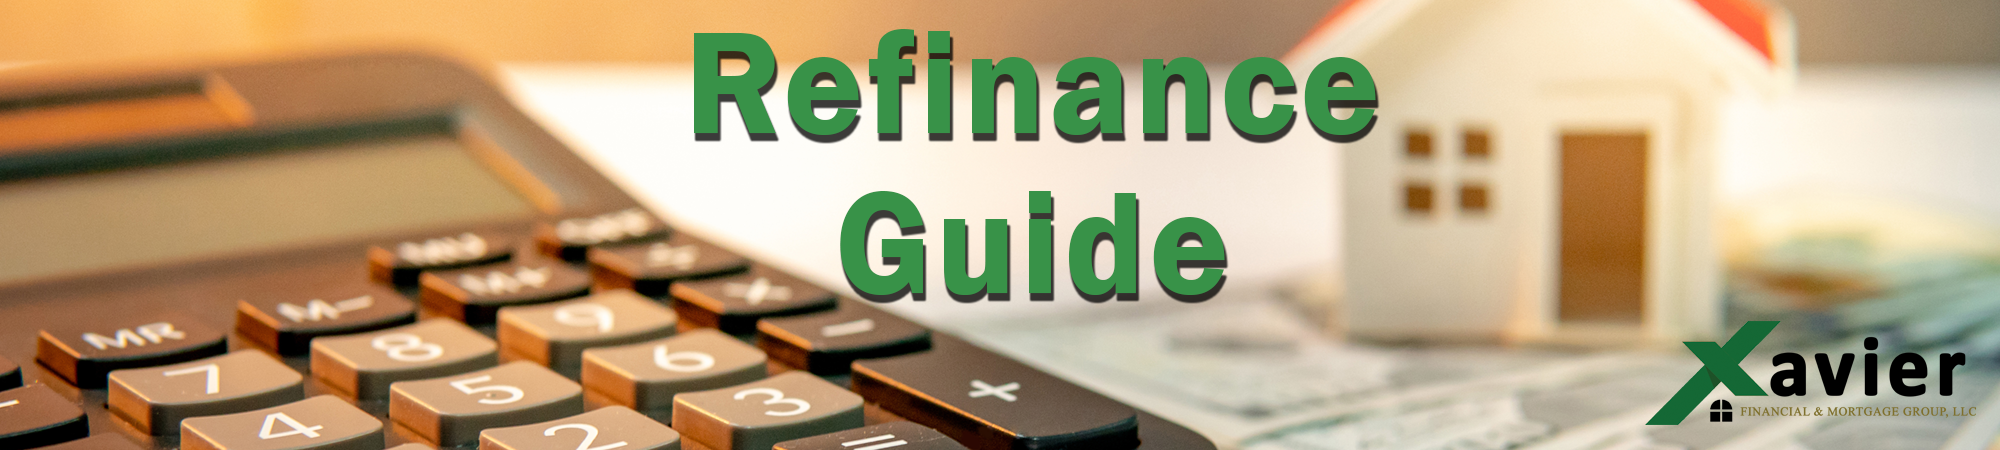 Home Refinancing Guide